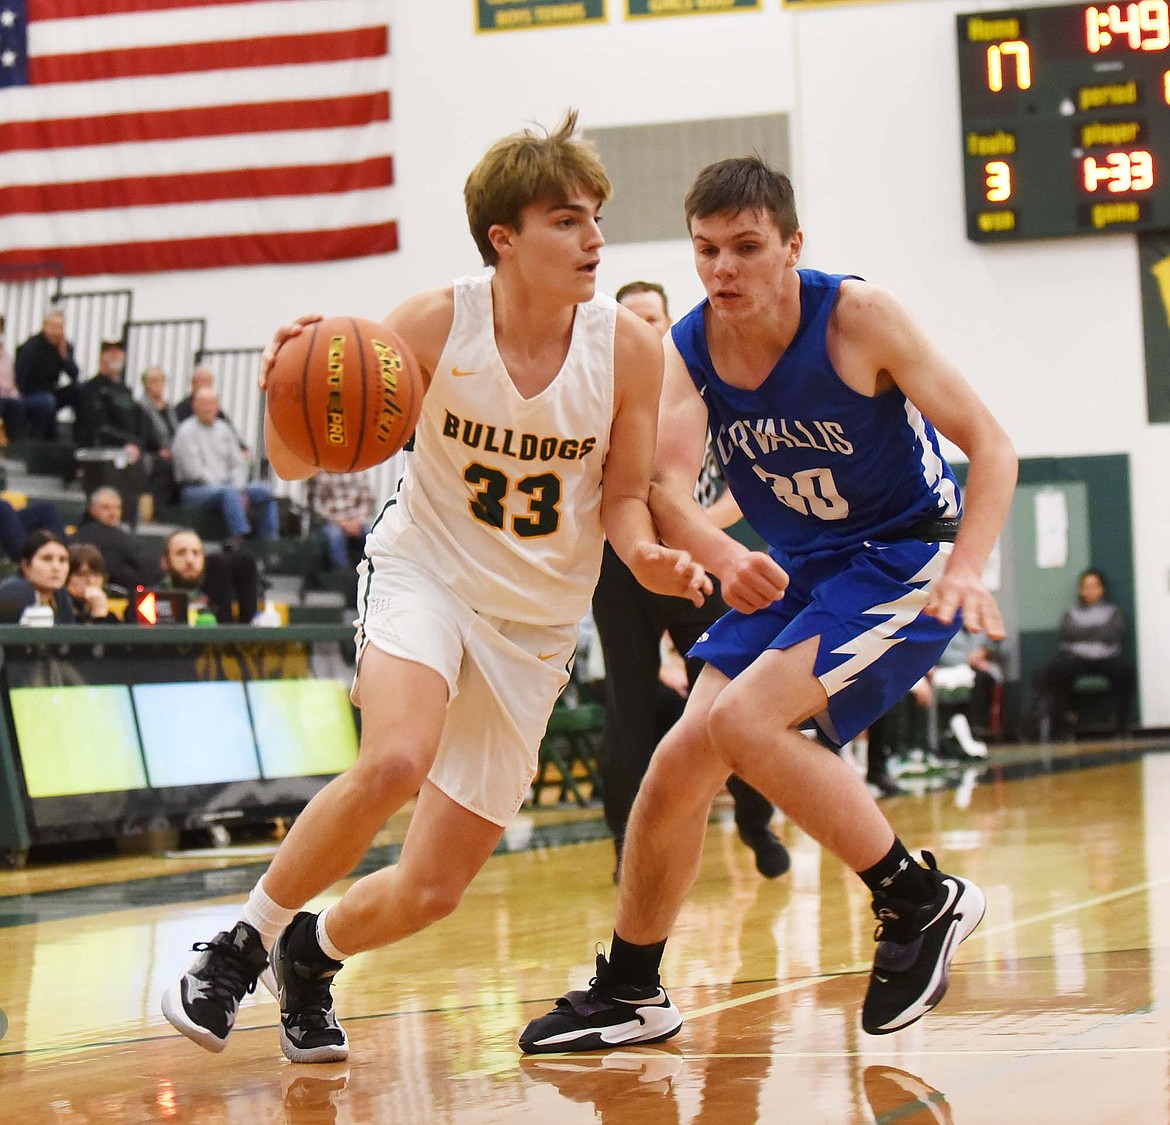 Whitefish’s Gabe Lund drives to the hoop against Corvallis Friday night at the Dawg Pound. (Heidi Desch/Whitefish Pilot)